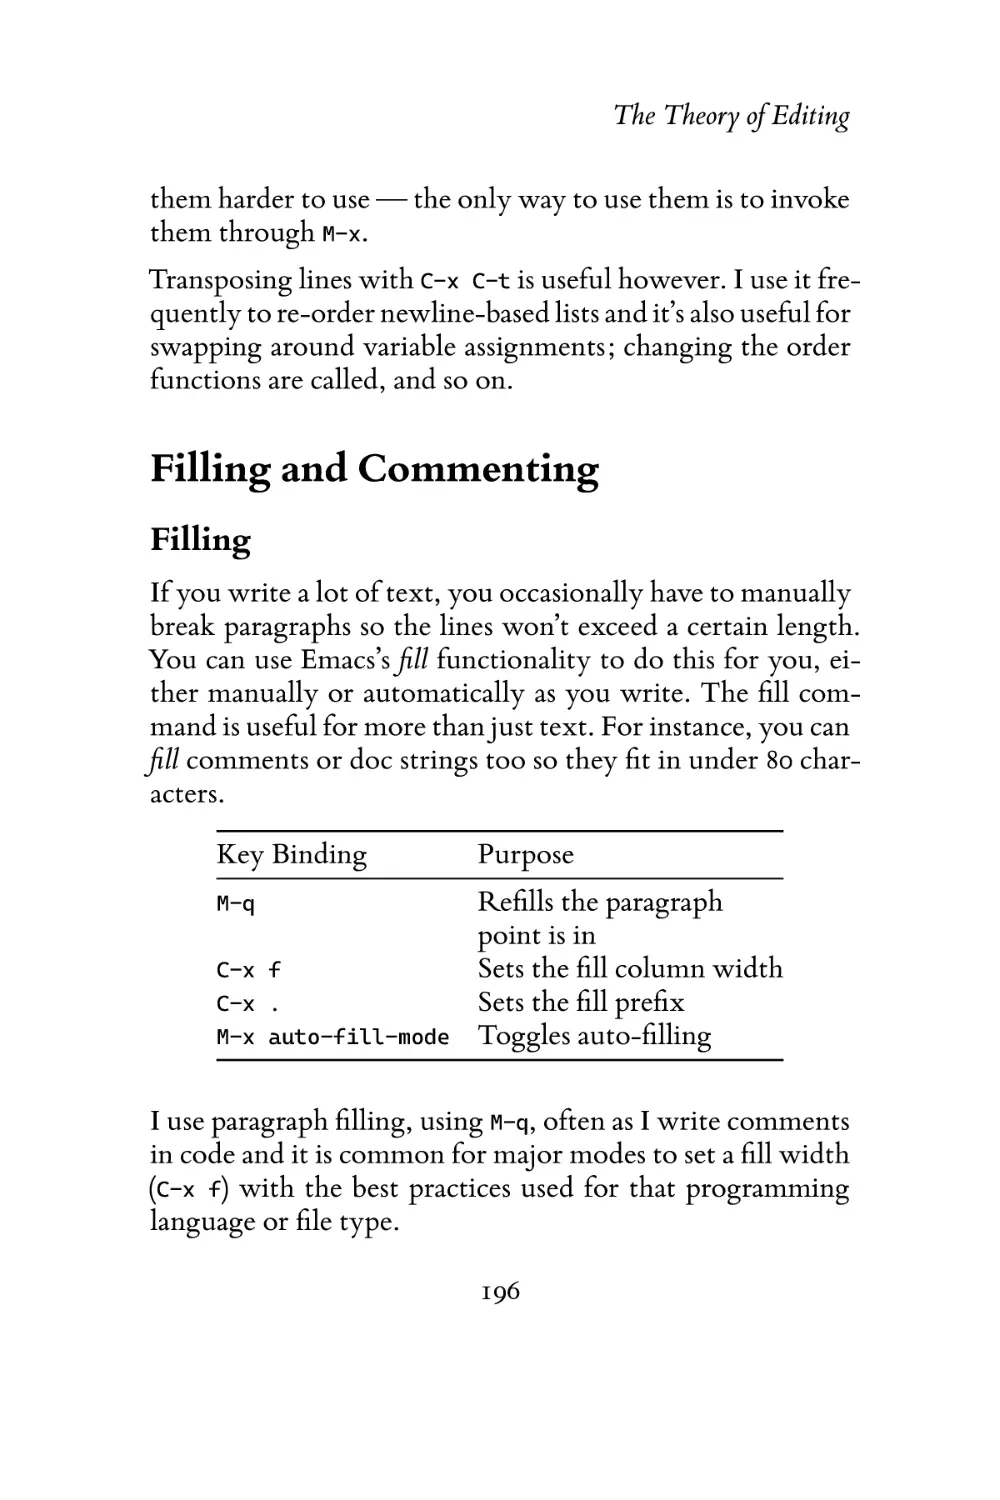 Filling and Commenting
Filling